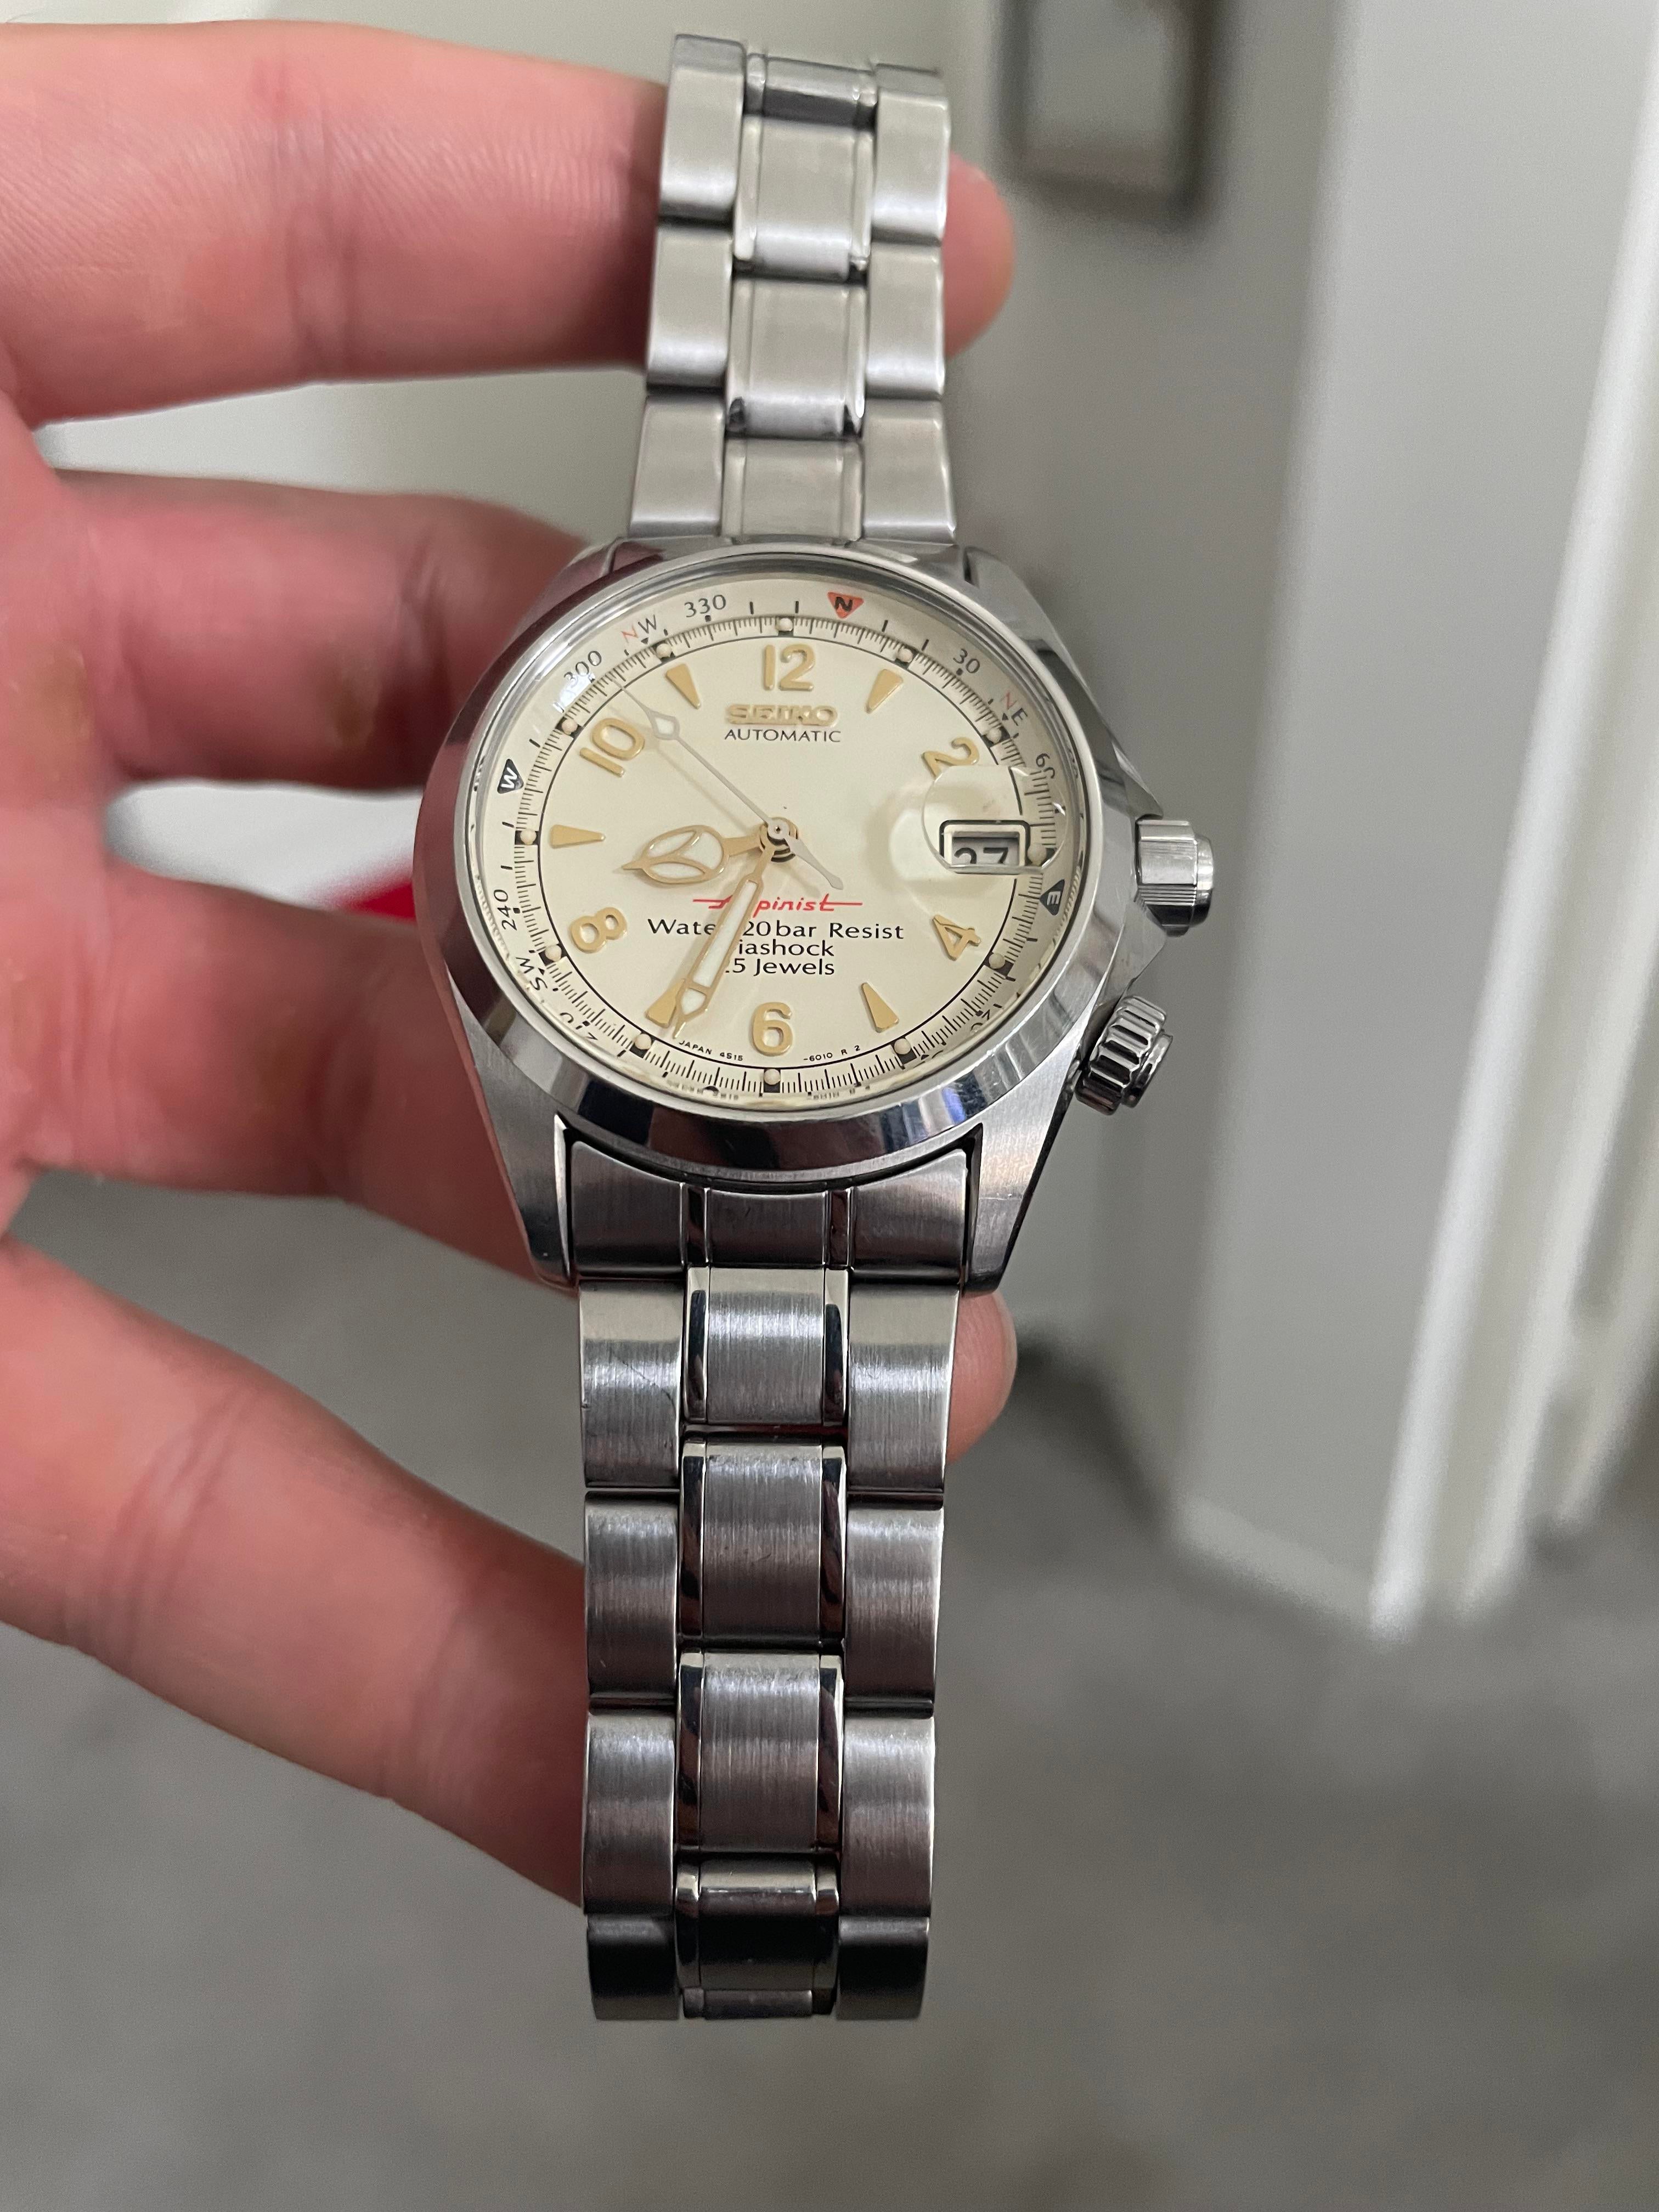 WTS] Seiko SCVF007 - Rare Bracelet - Great Condition - Red Alpinist |  WatchCharts